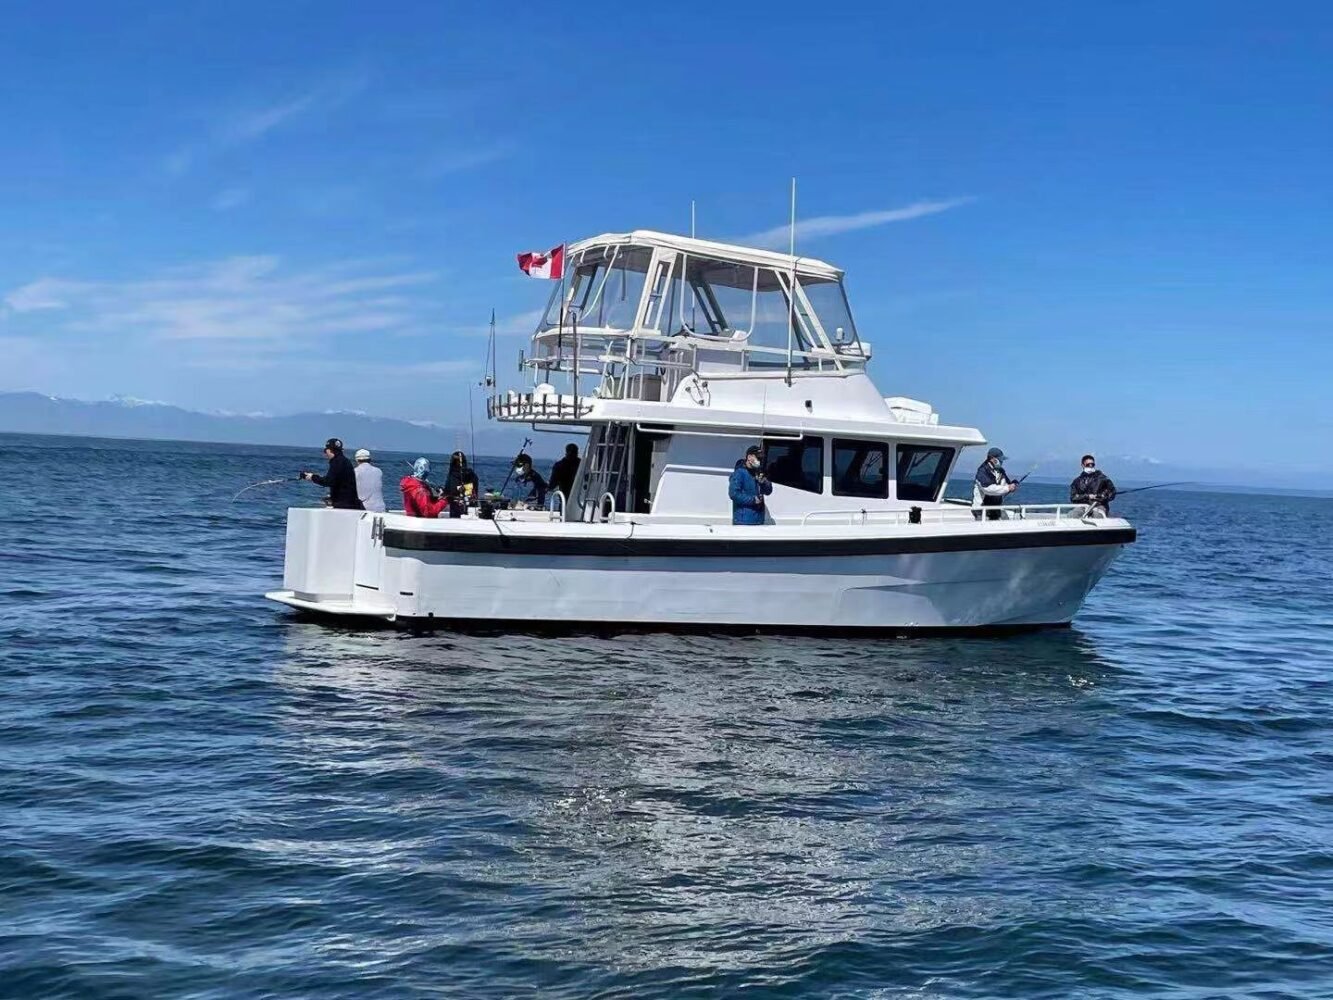 Fishing Charter Vancouver, 40 ft boat, 12 guests